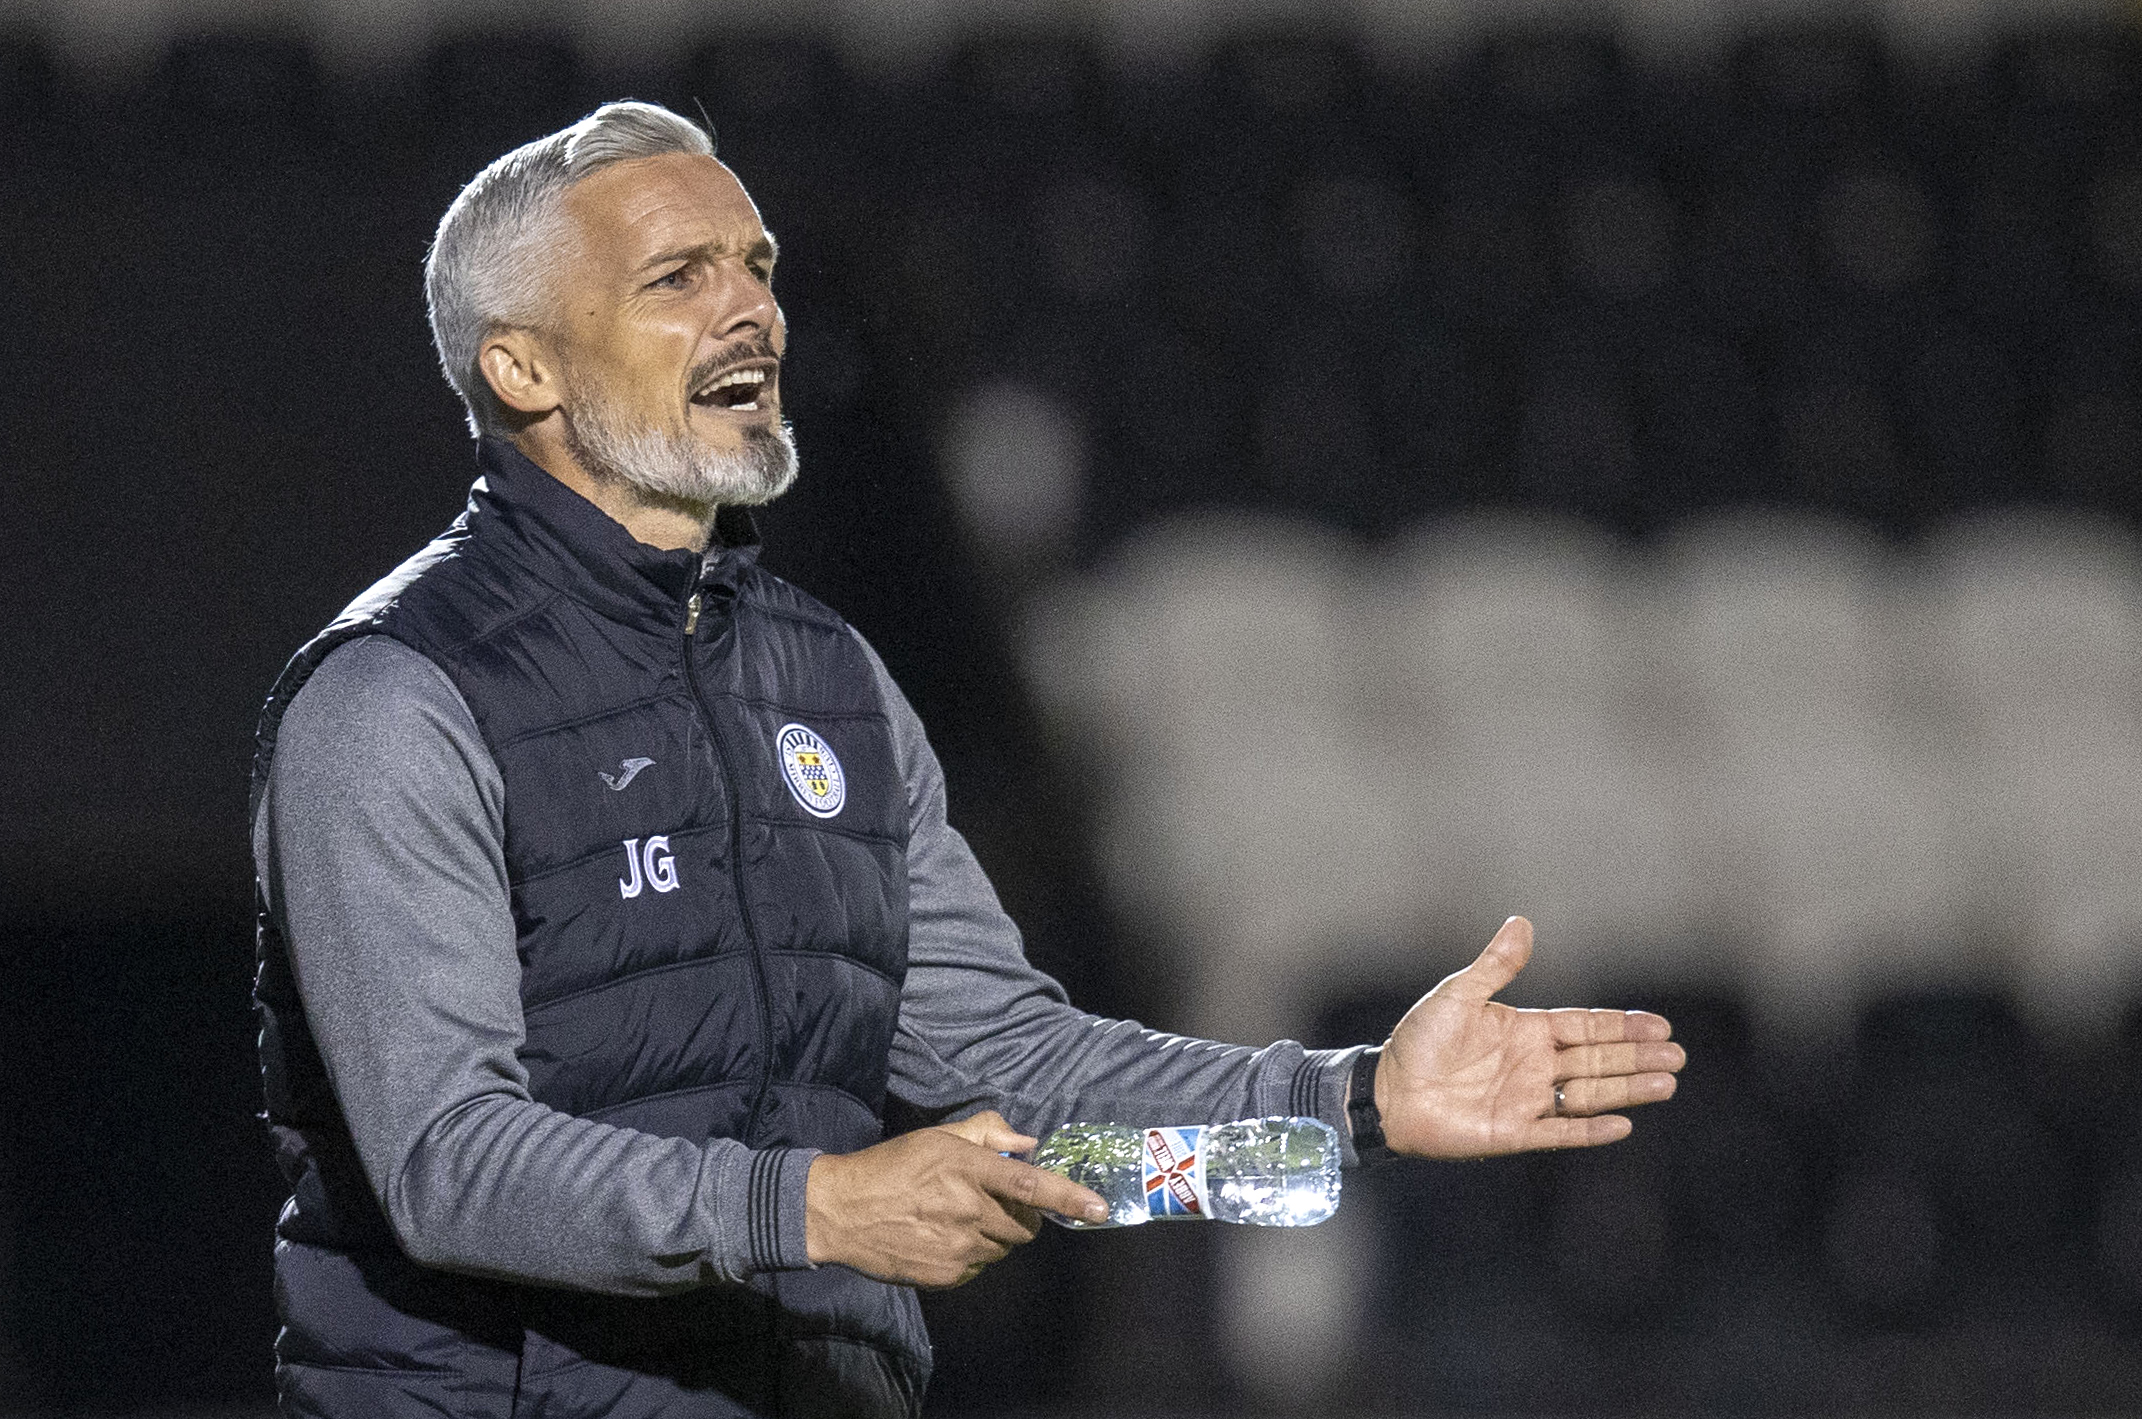 St Mirren boss Jim Goodwin ‘absolutely delighted’ with capture of Eamonn Brophy